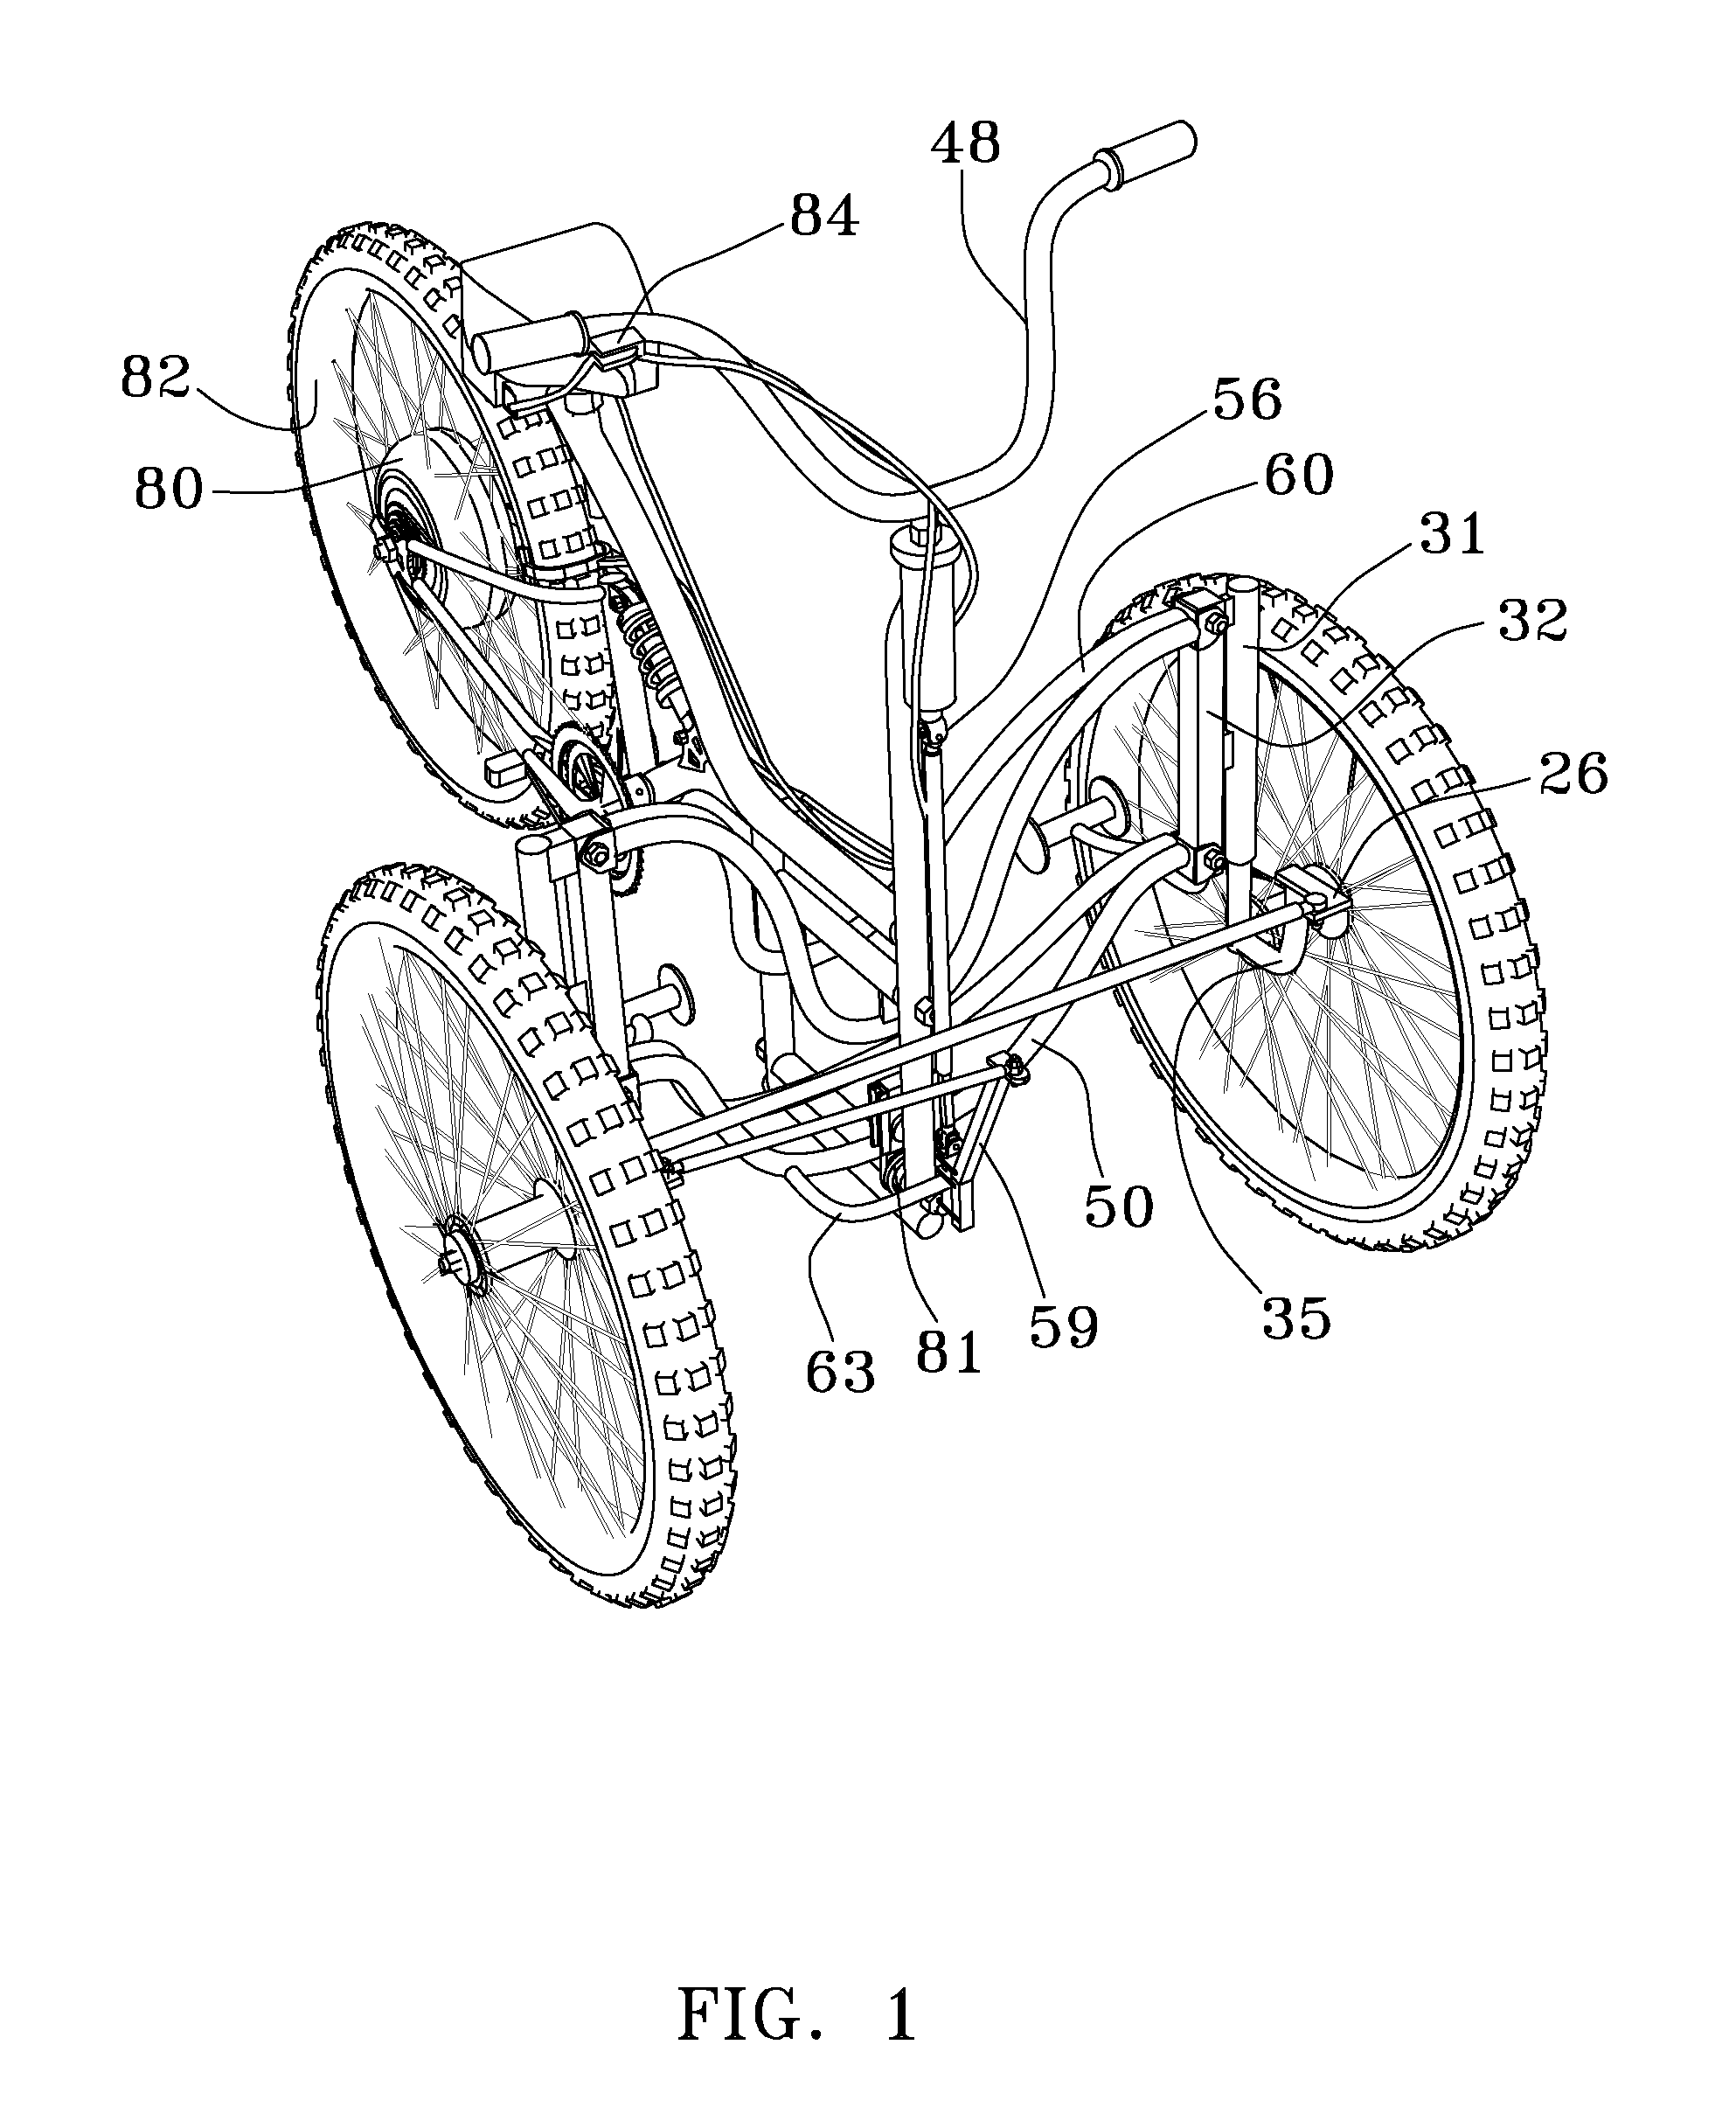 Vehicle with improved integrated steering and suspension system